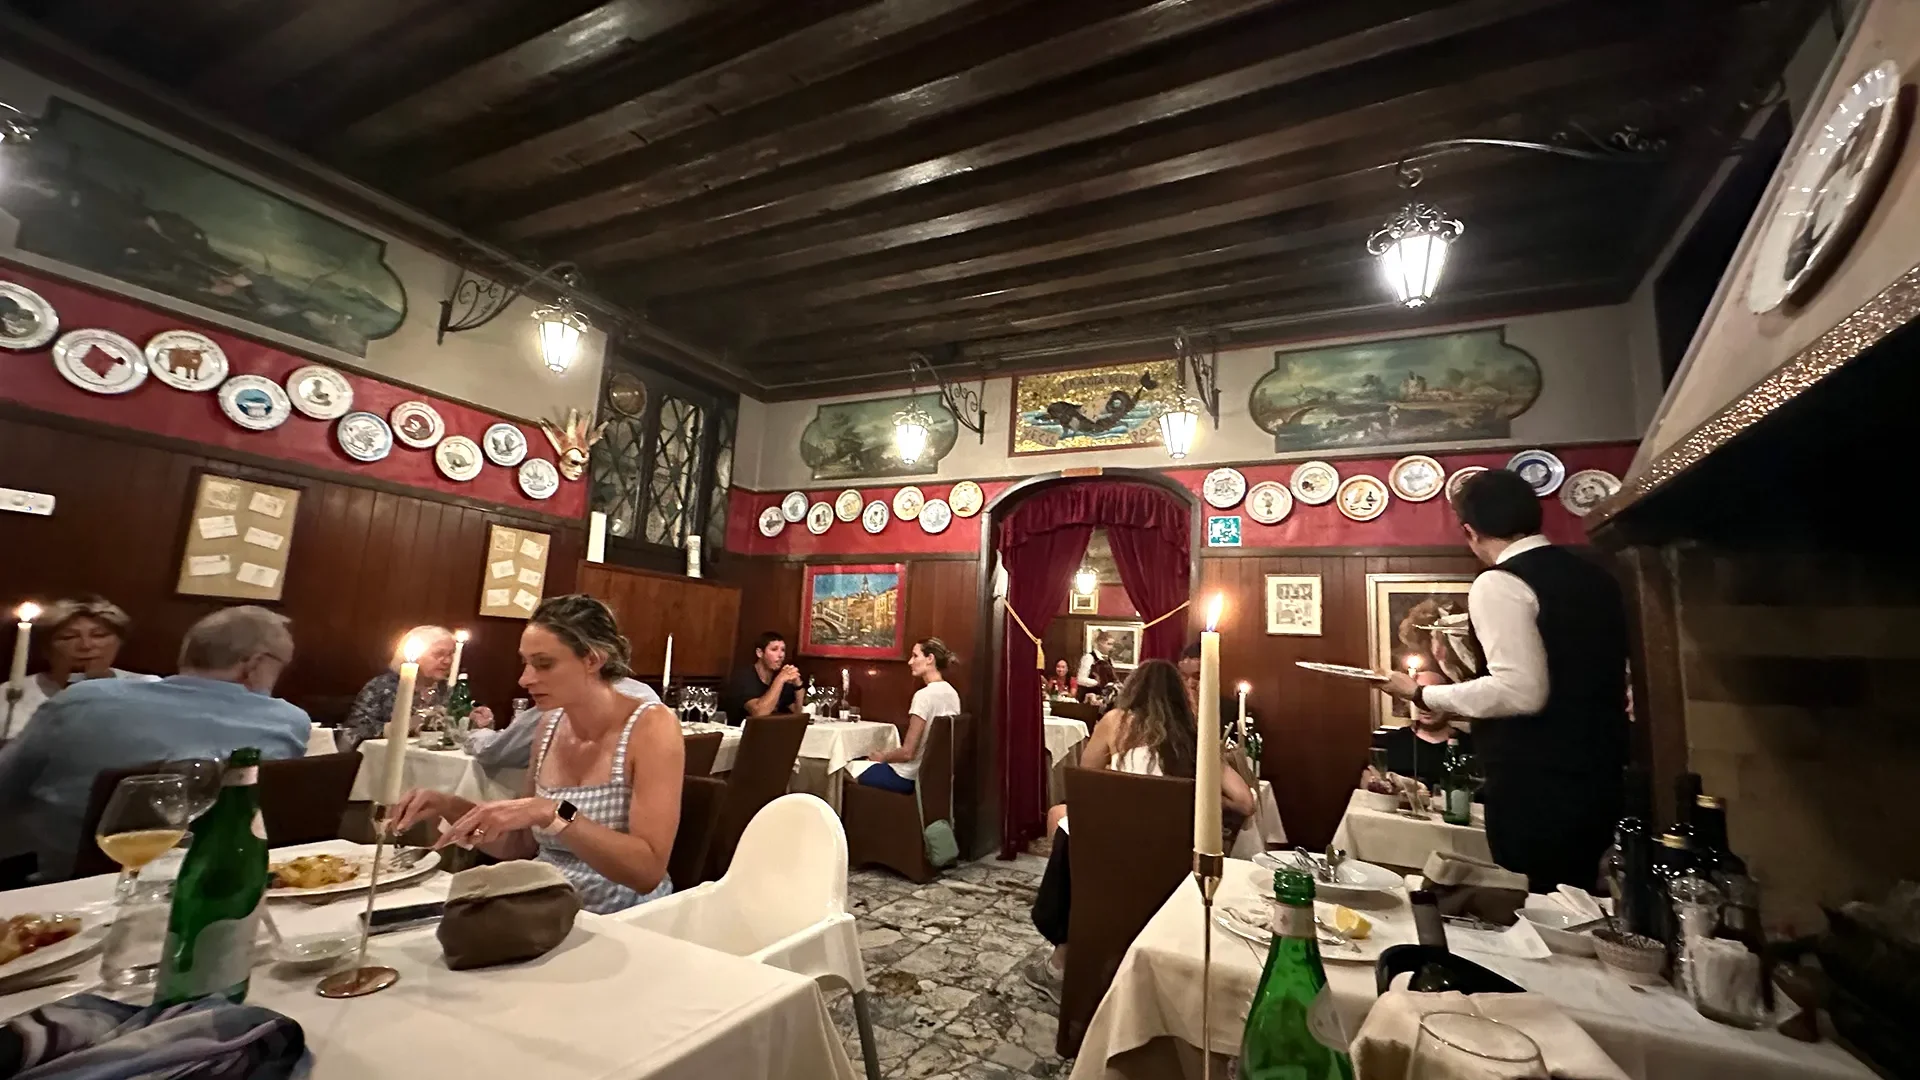 One of the two main dining rooms at Antica Trattoria Poste Vecie.